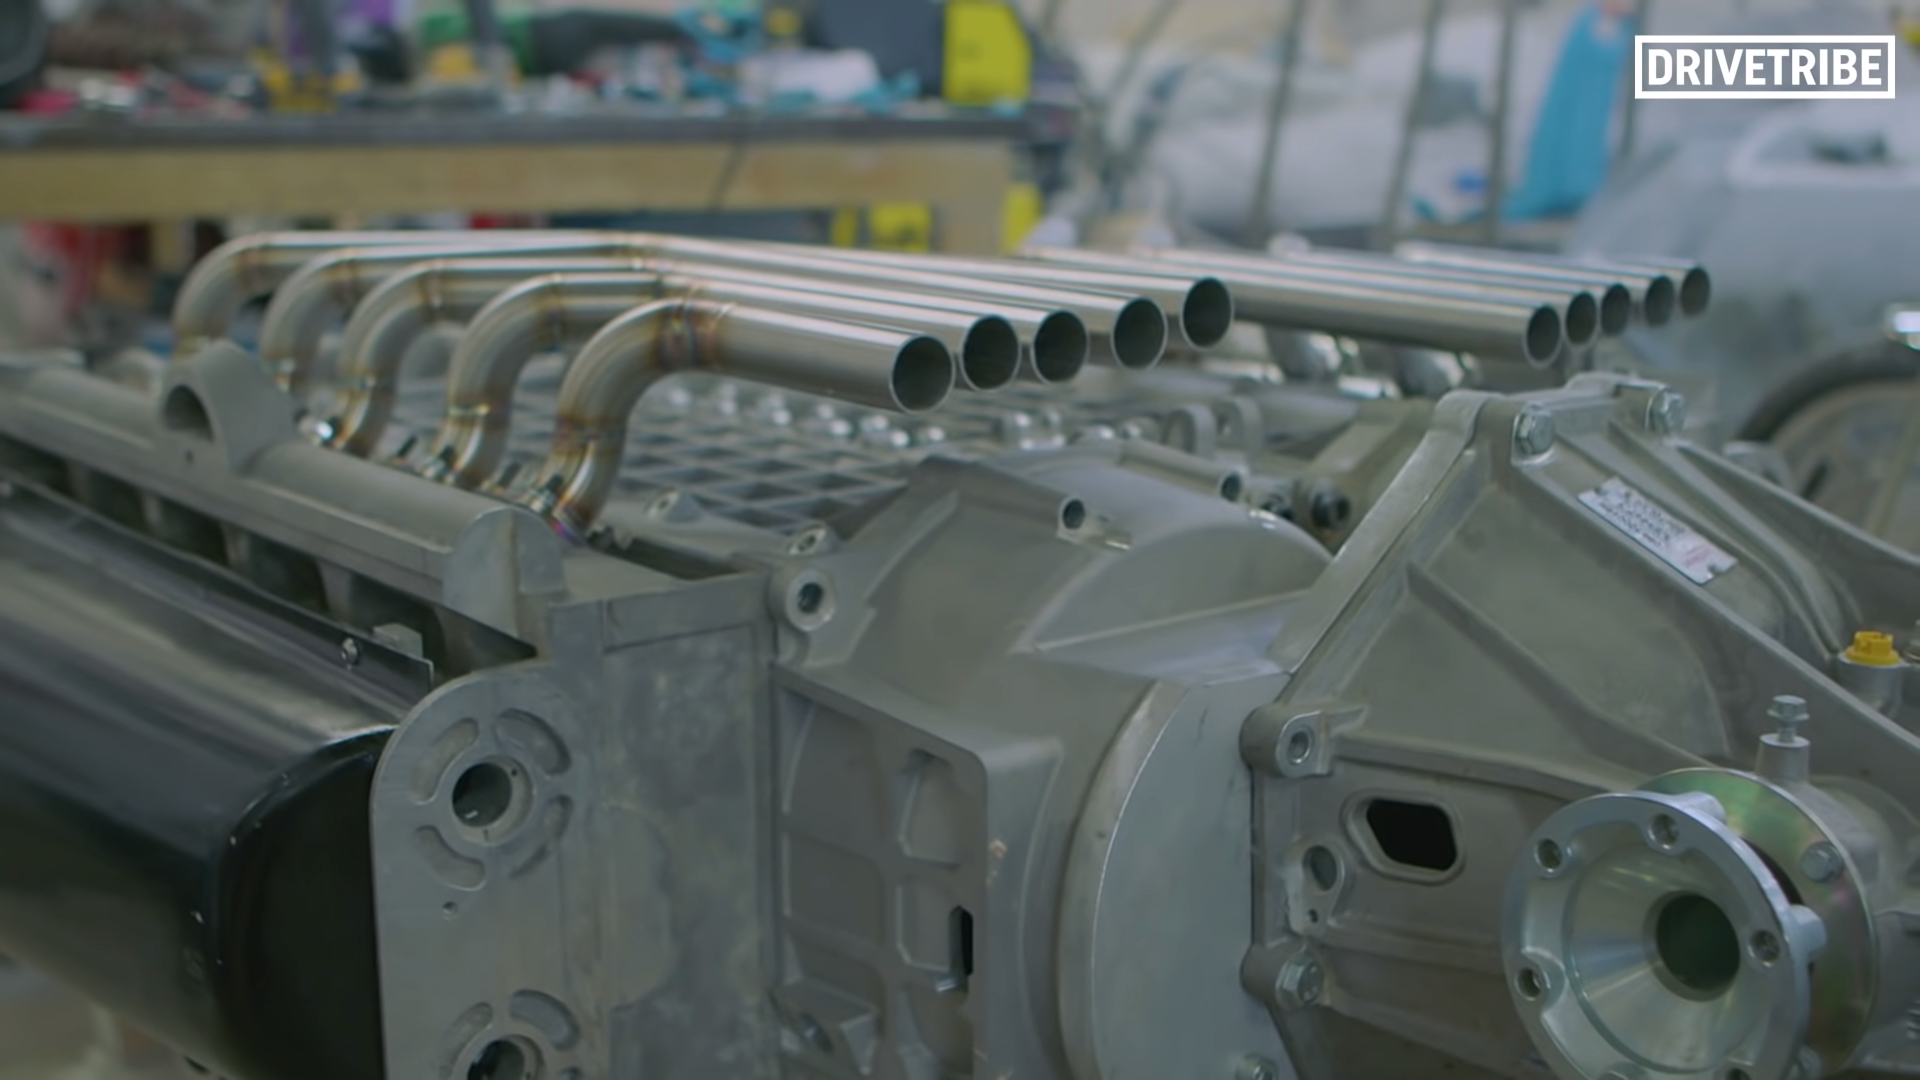 This 400-HP, 20-Cylinder Flat-X Engine Is One of the Wildest Things in Internal Combustion